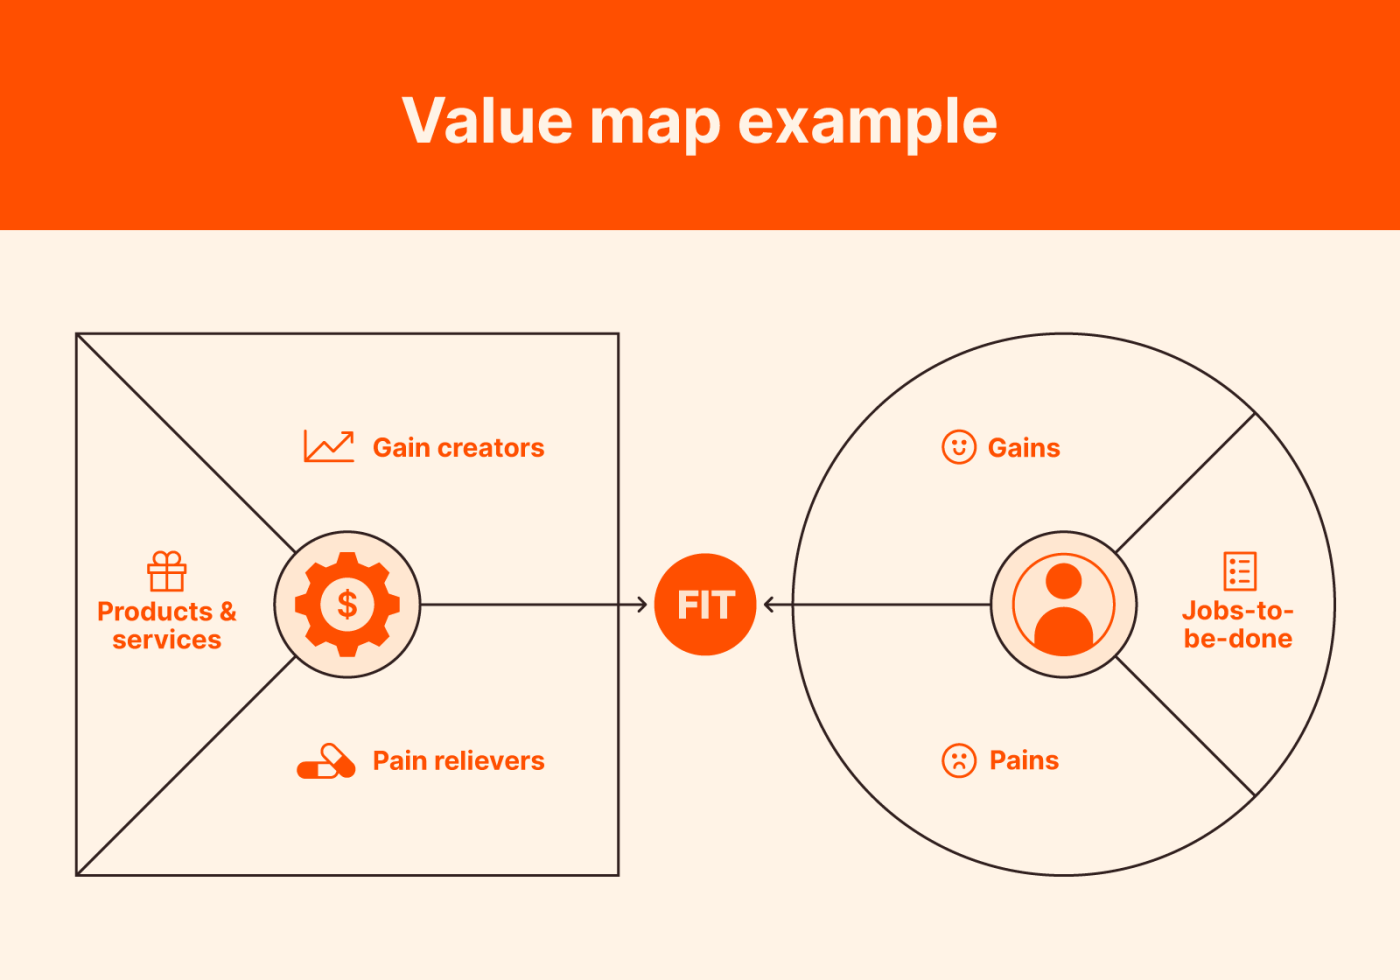 Graphic of a value map, with pains, gains, and customer jobs-to-be-done on the right; and gain creators, pain relievers, and products and services on the left. Where these two sides connect is where you'll find product fit.